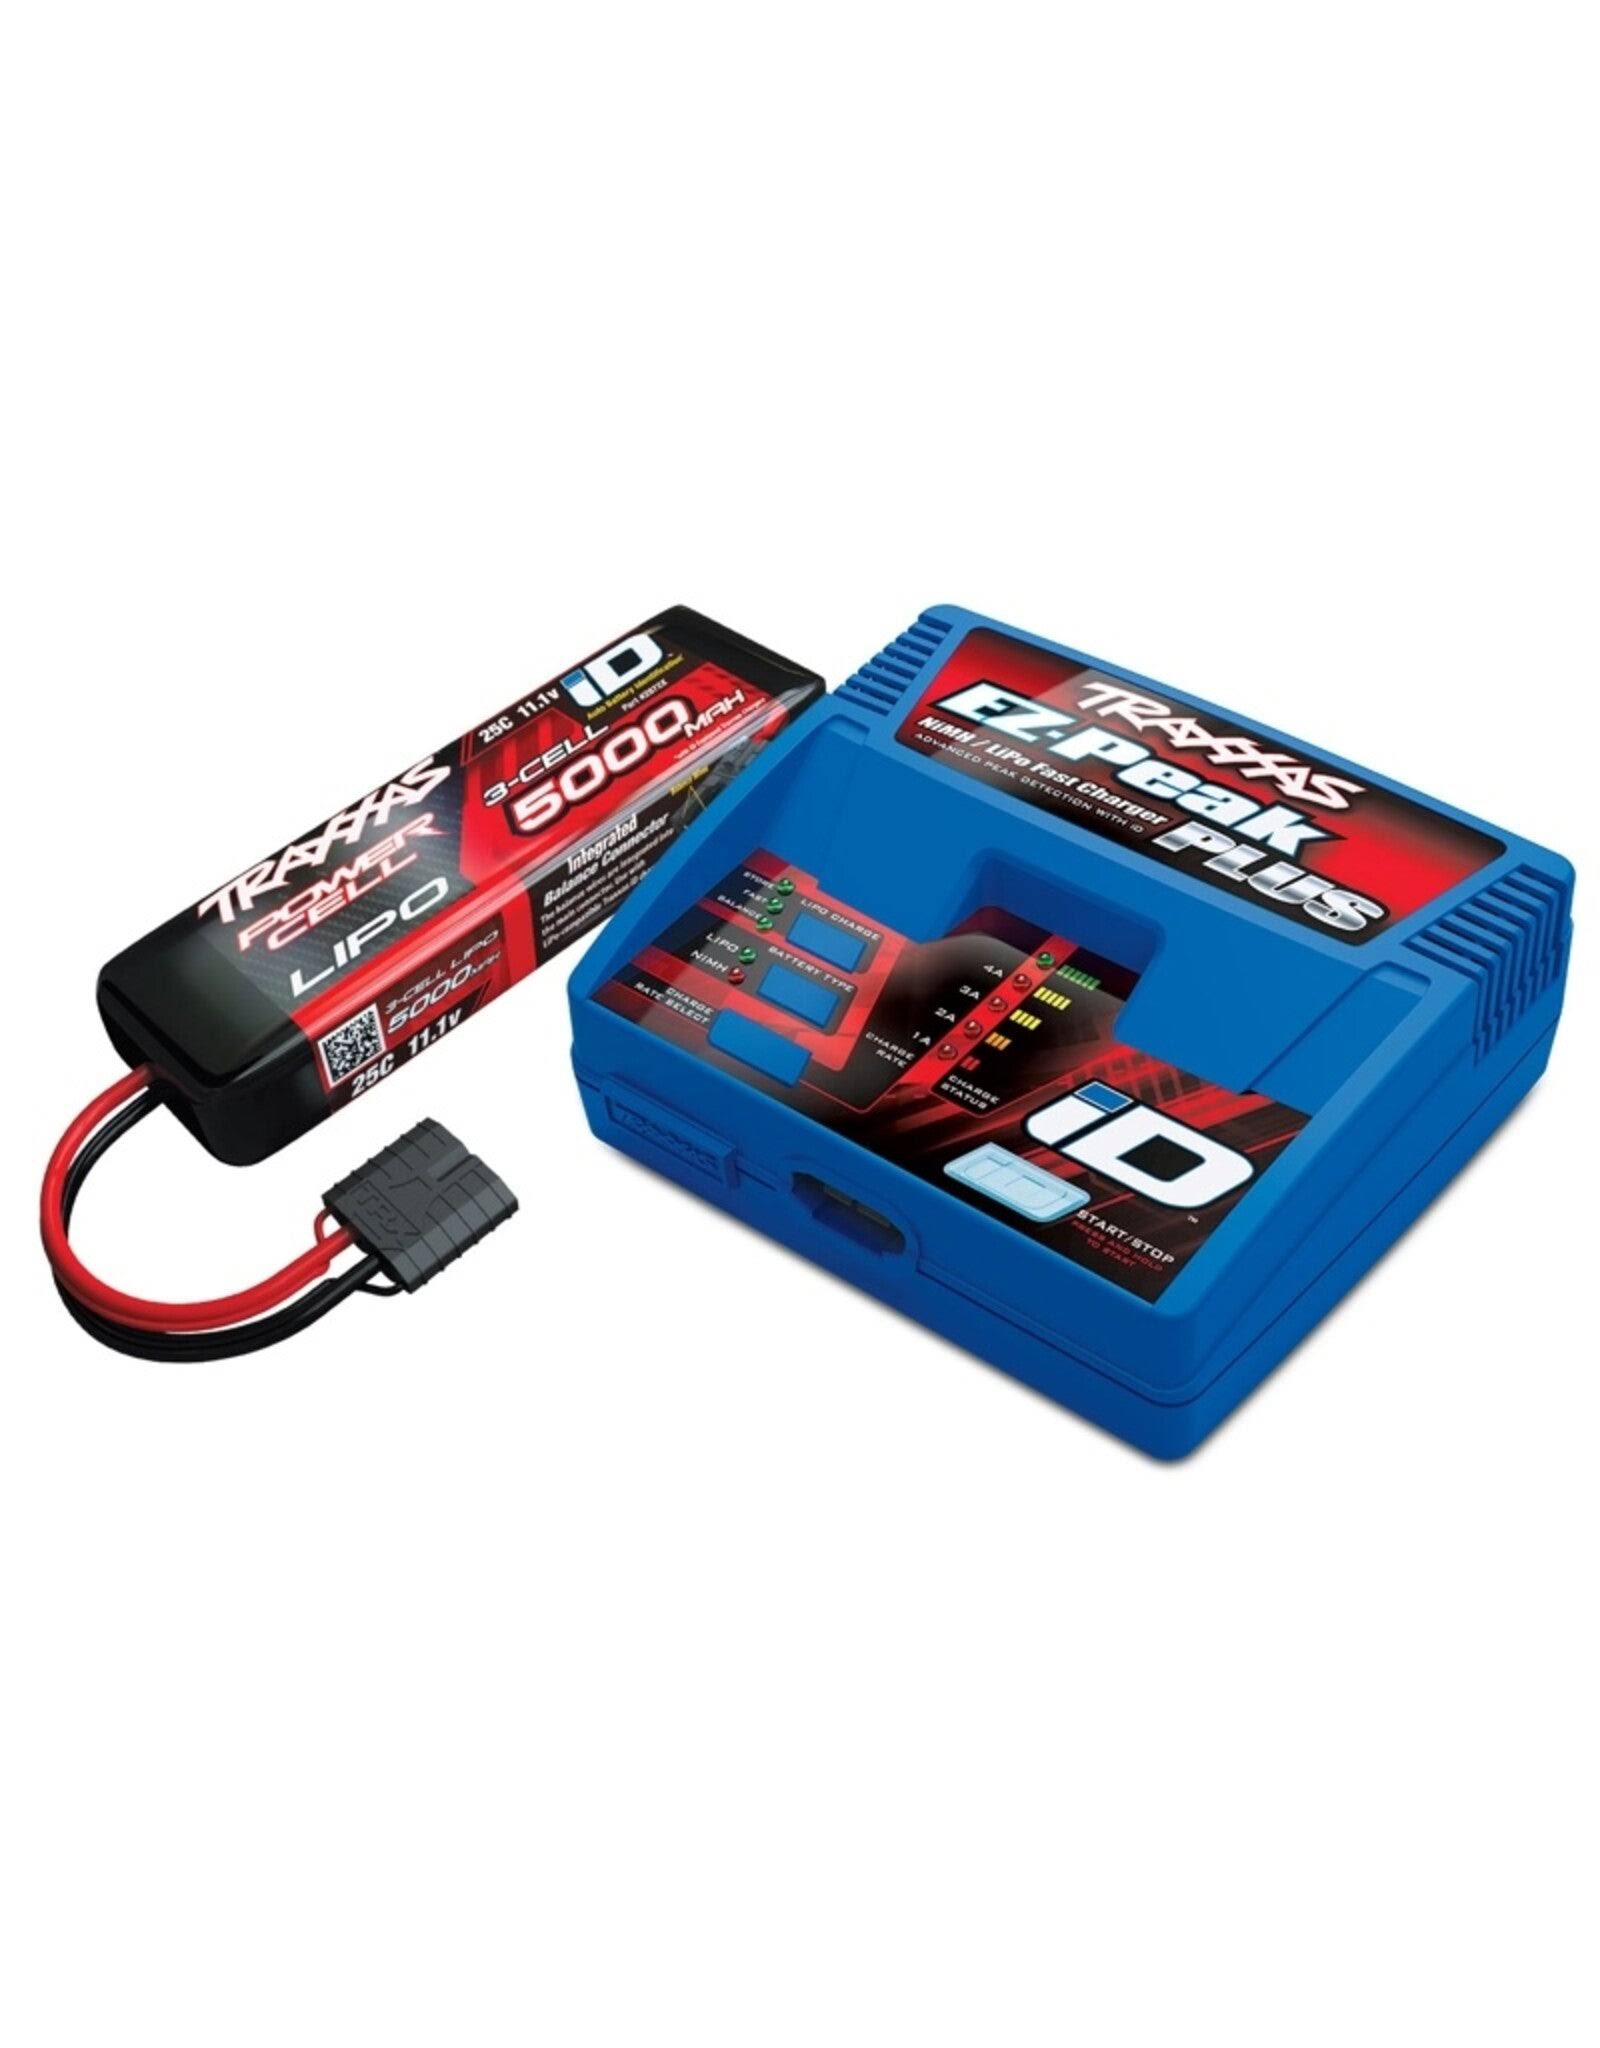 Traxxas Battery/Charger Completer Pack #2970-3S (Incl #2970/#2872X)